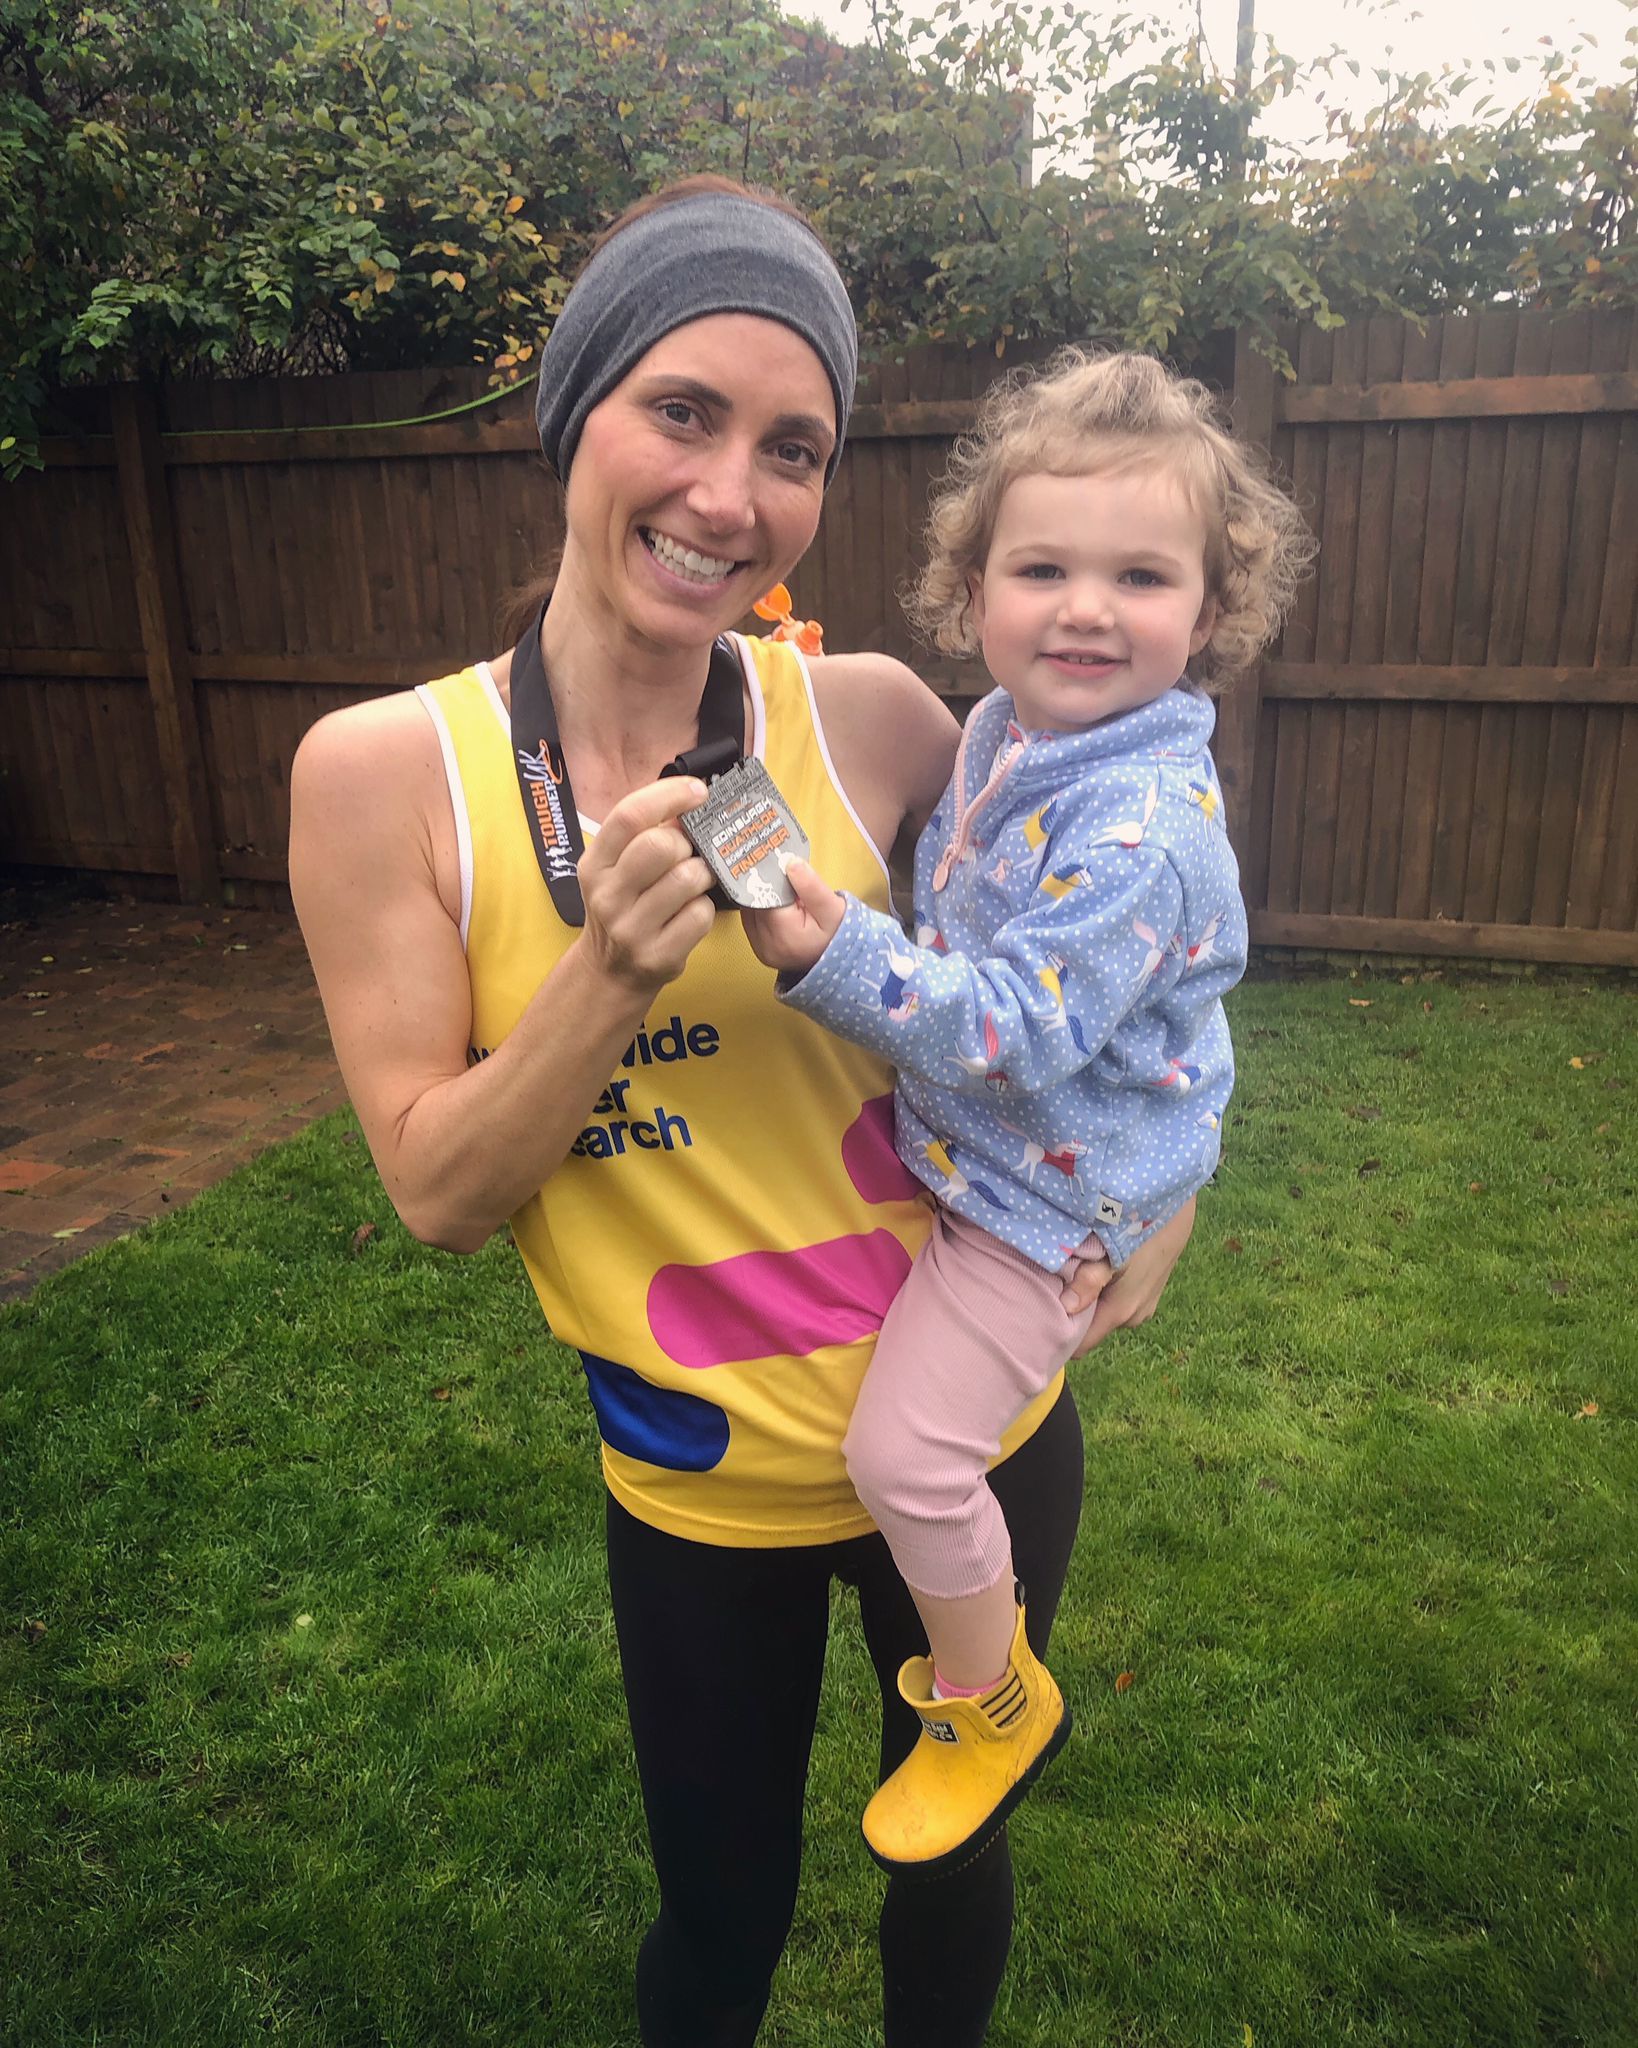 Victoria Robb has raised more than £3,600 for Worldwide Cancer Research